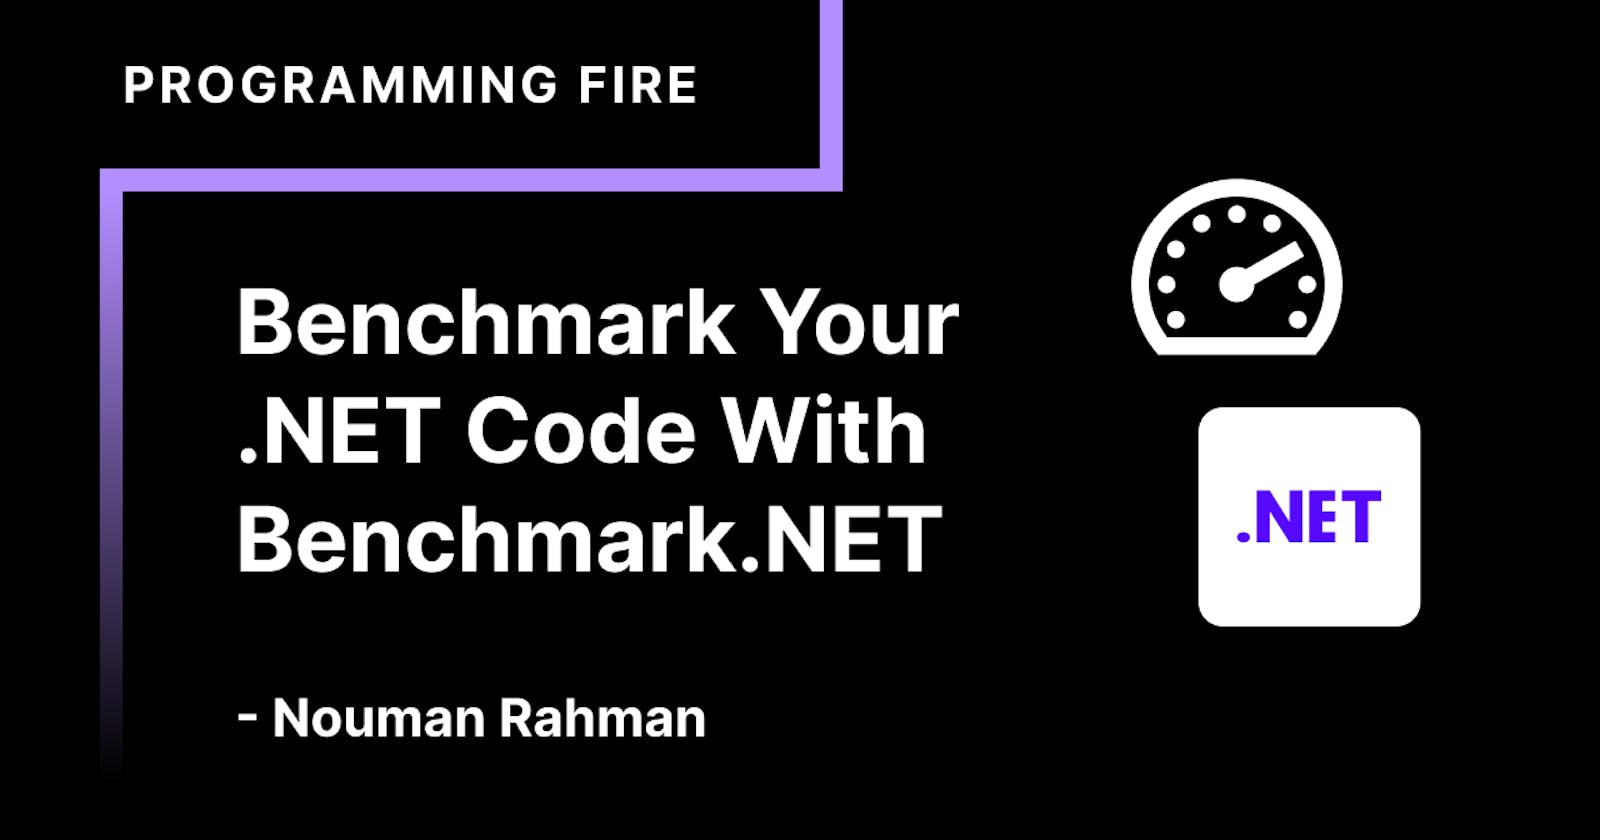 Benchmark Your .NET Code With Benchmark.NET